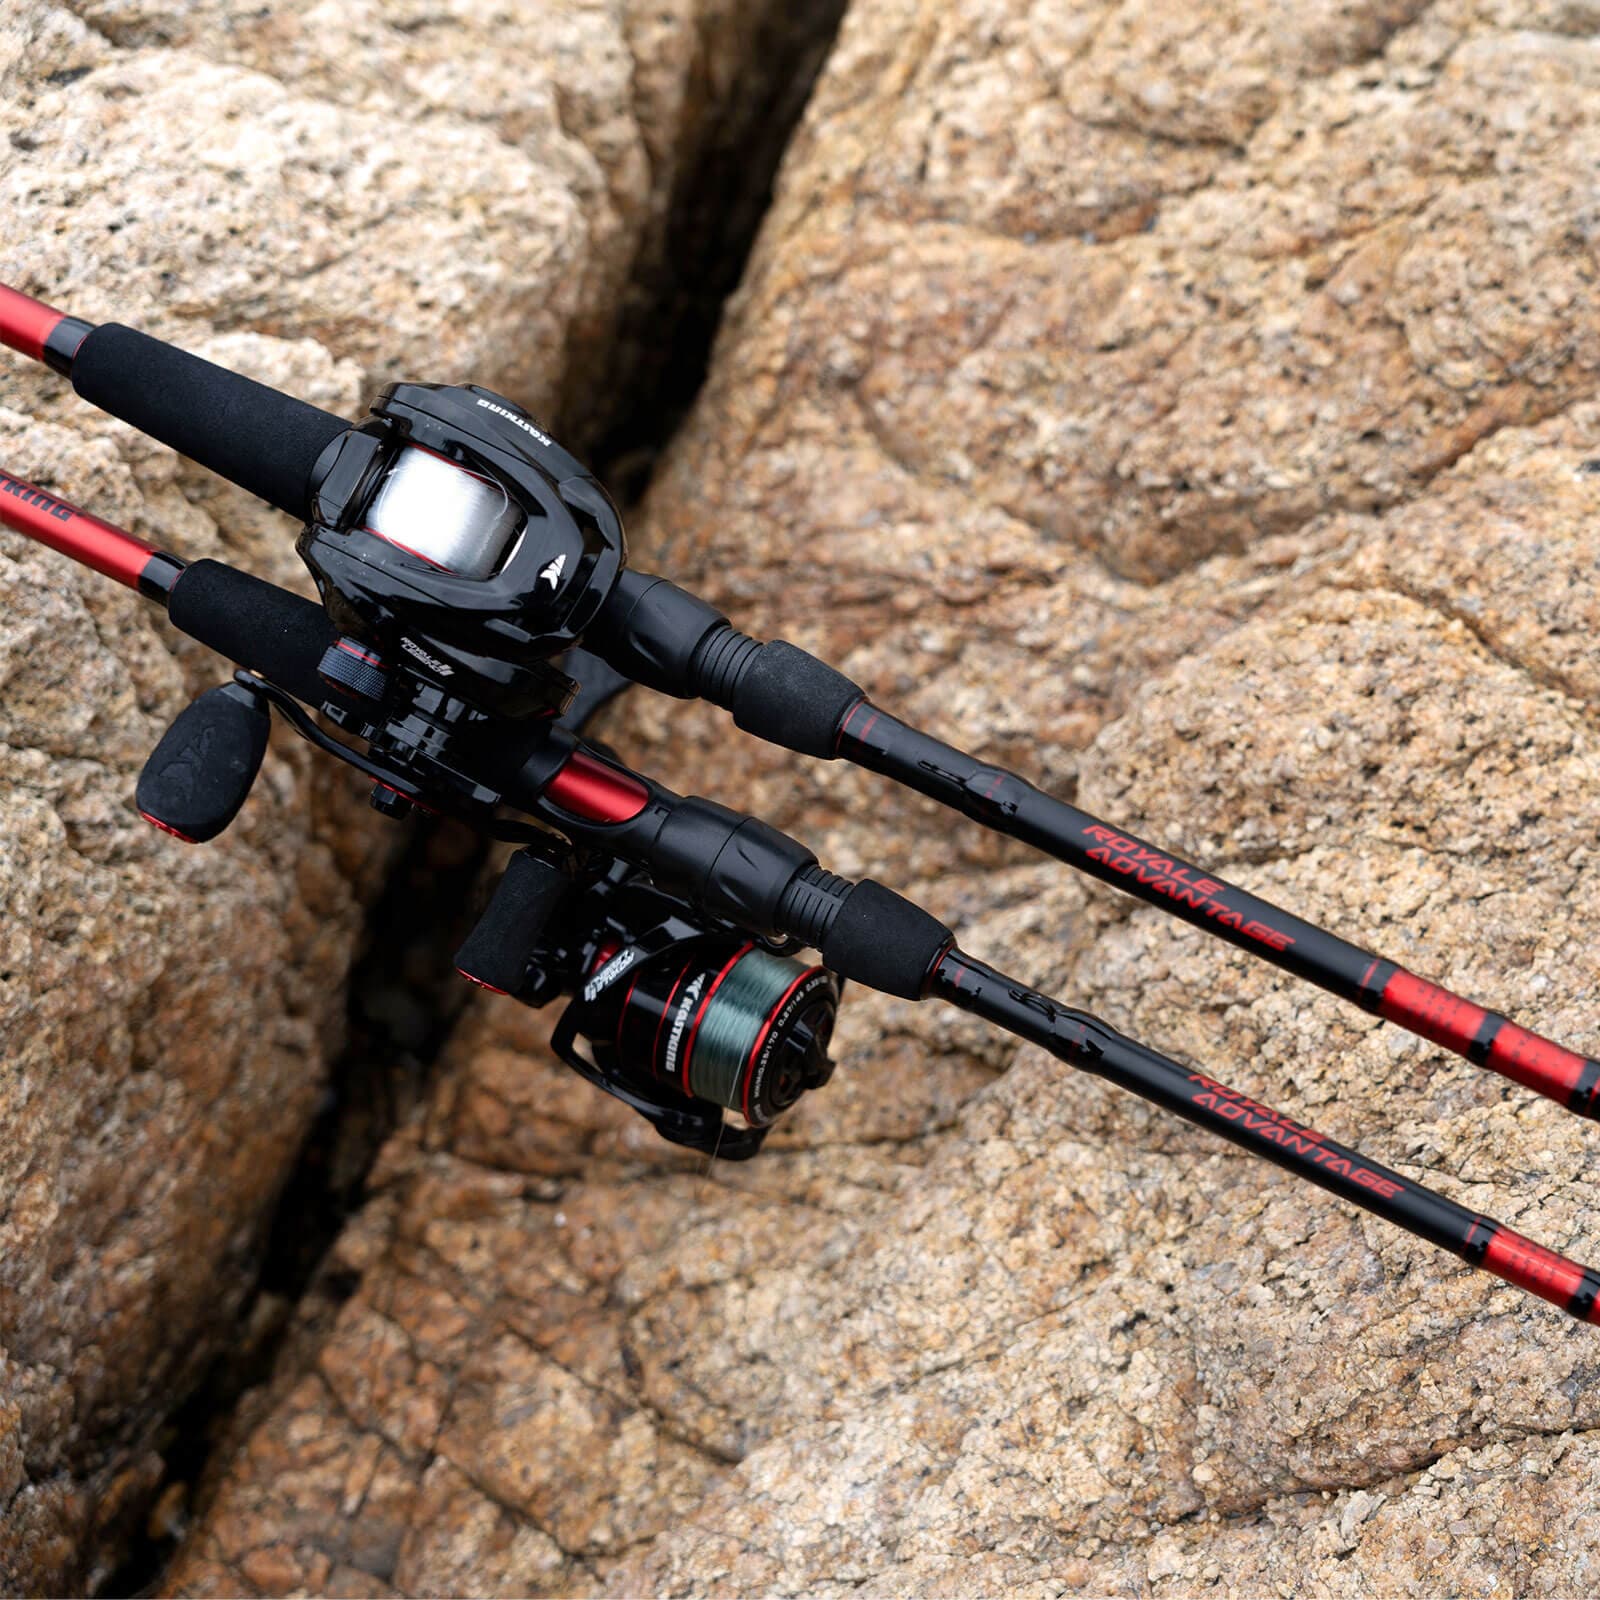 The Best Fishing Rod Accessories in 2022 – KastKing